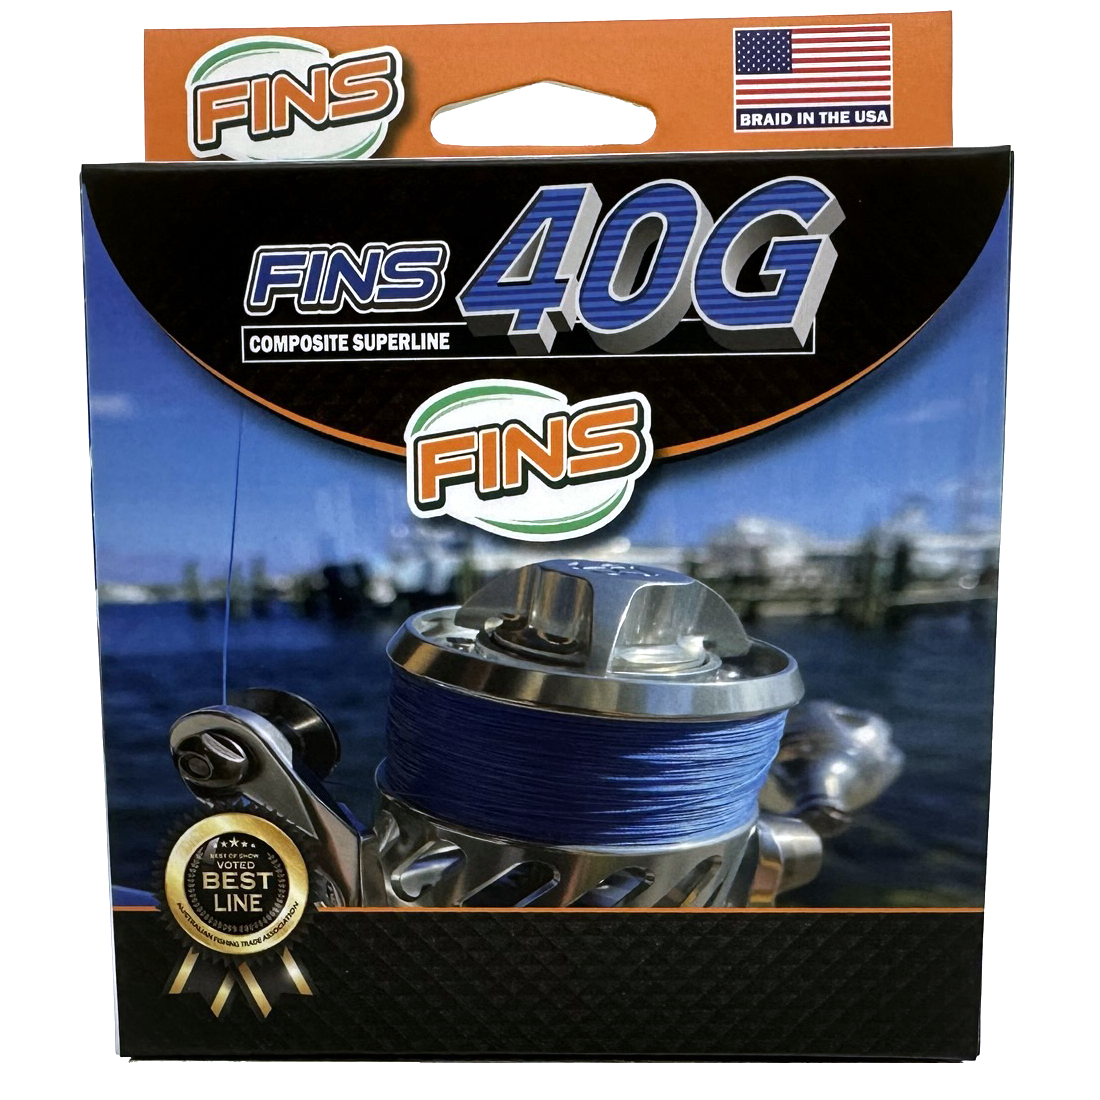 Box Front Fins 40g Braided Fishing Line Pound Test 65-100